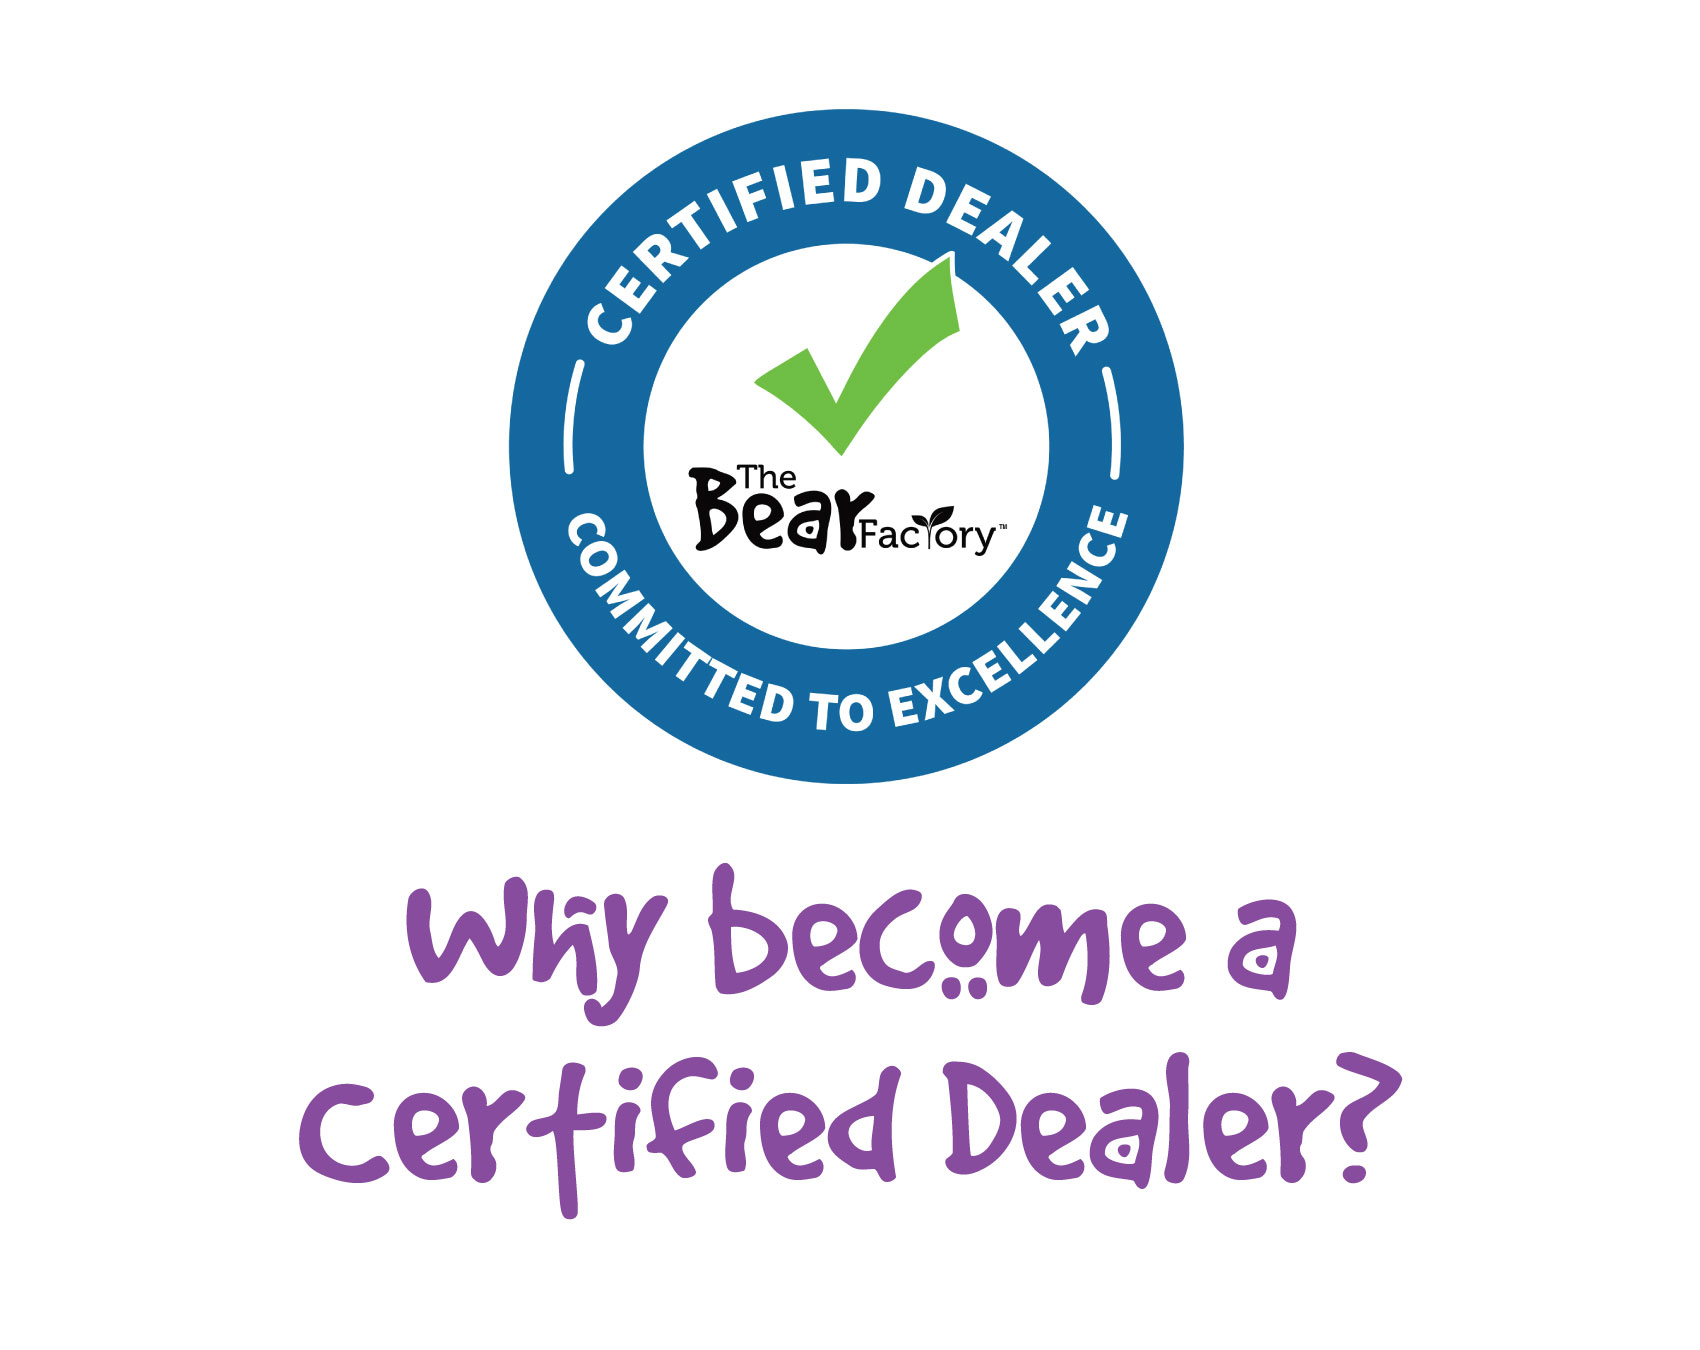 A blue seal that says "certified dealer committed to excellence" with purple text underneath that says "why become a certified dealer"